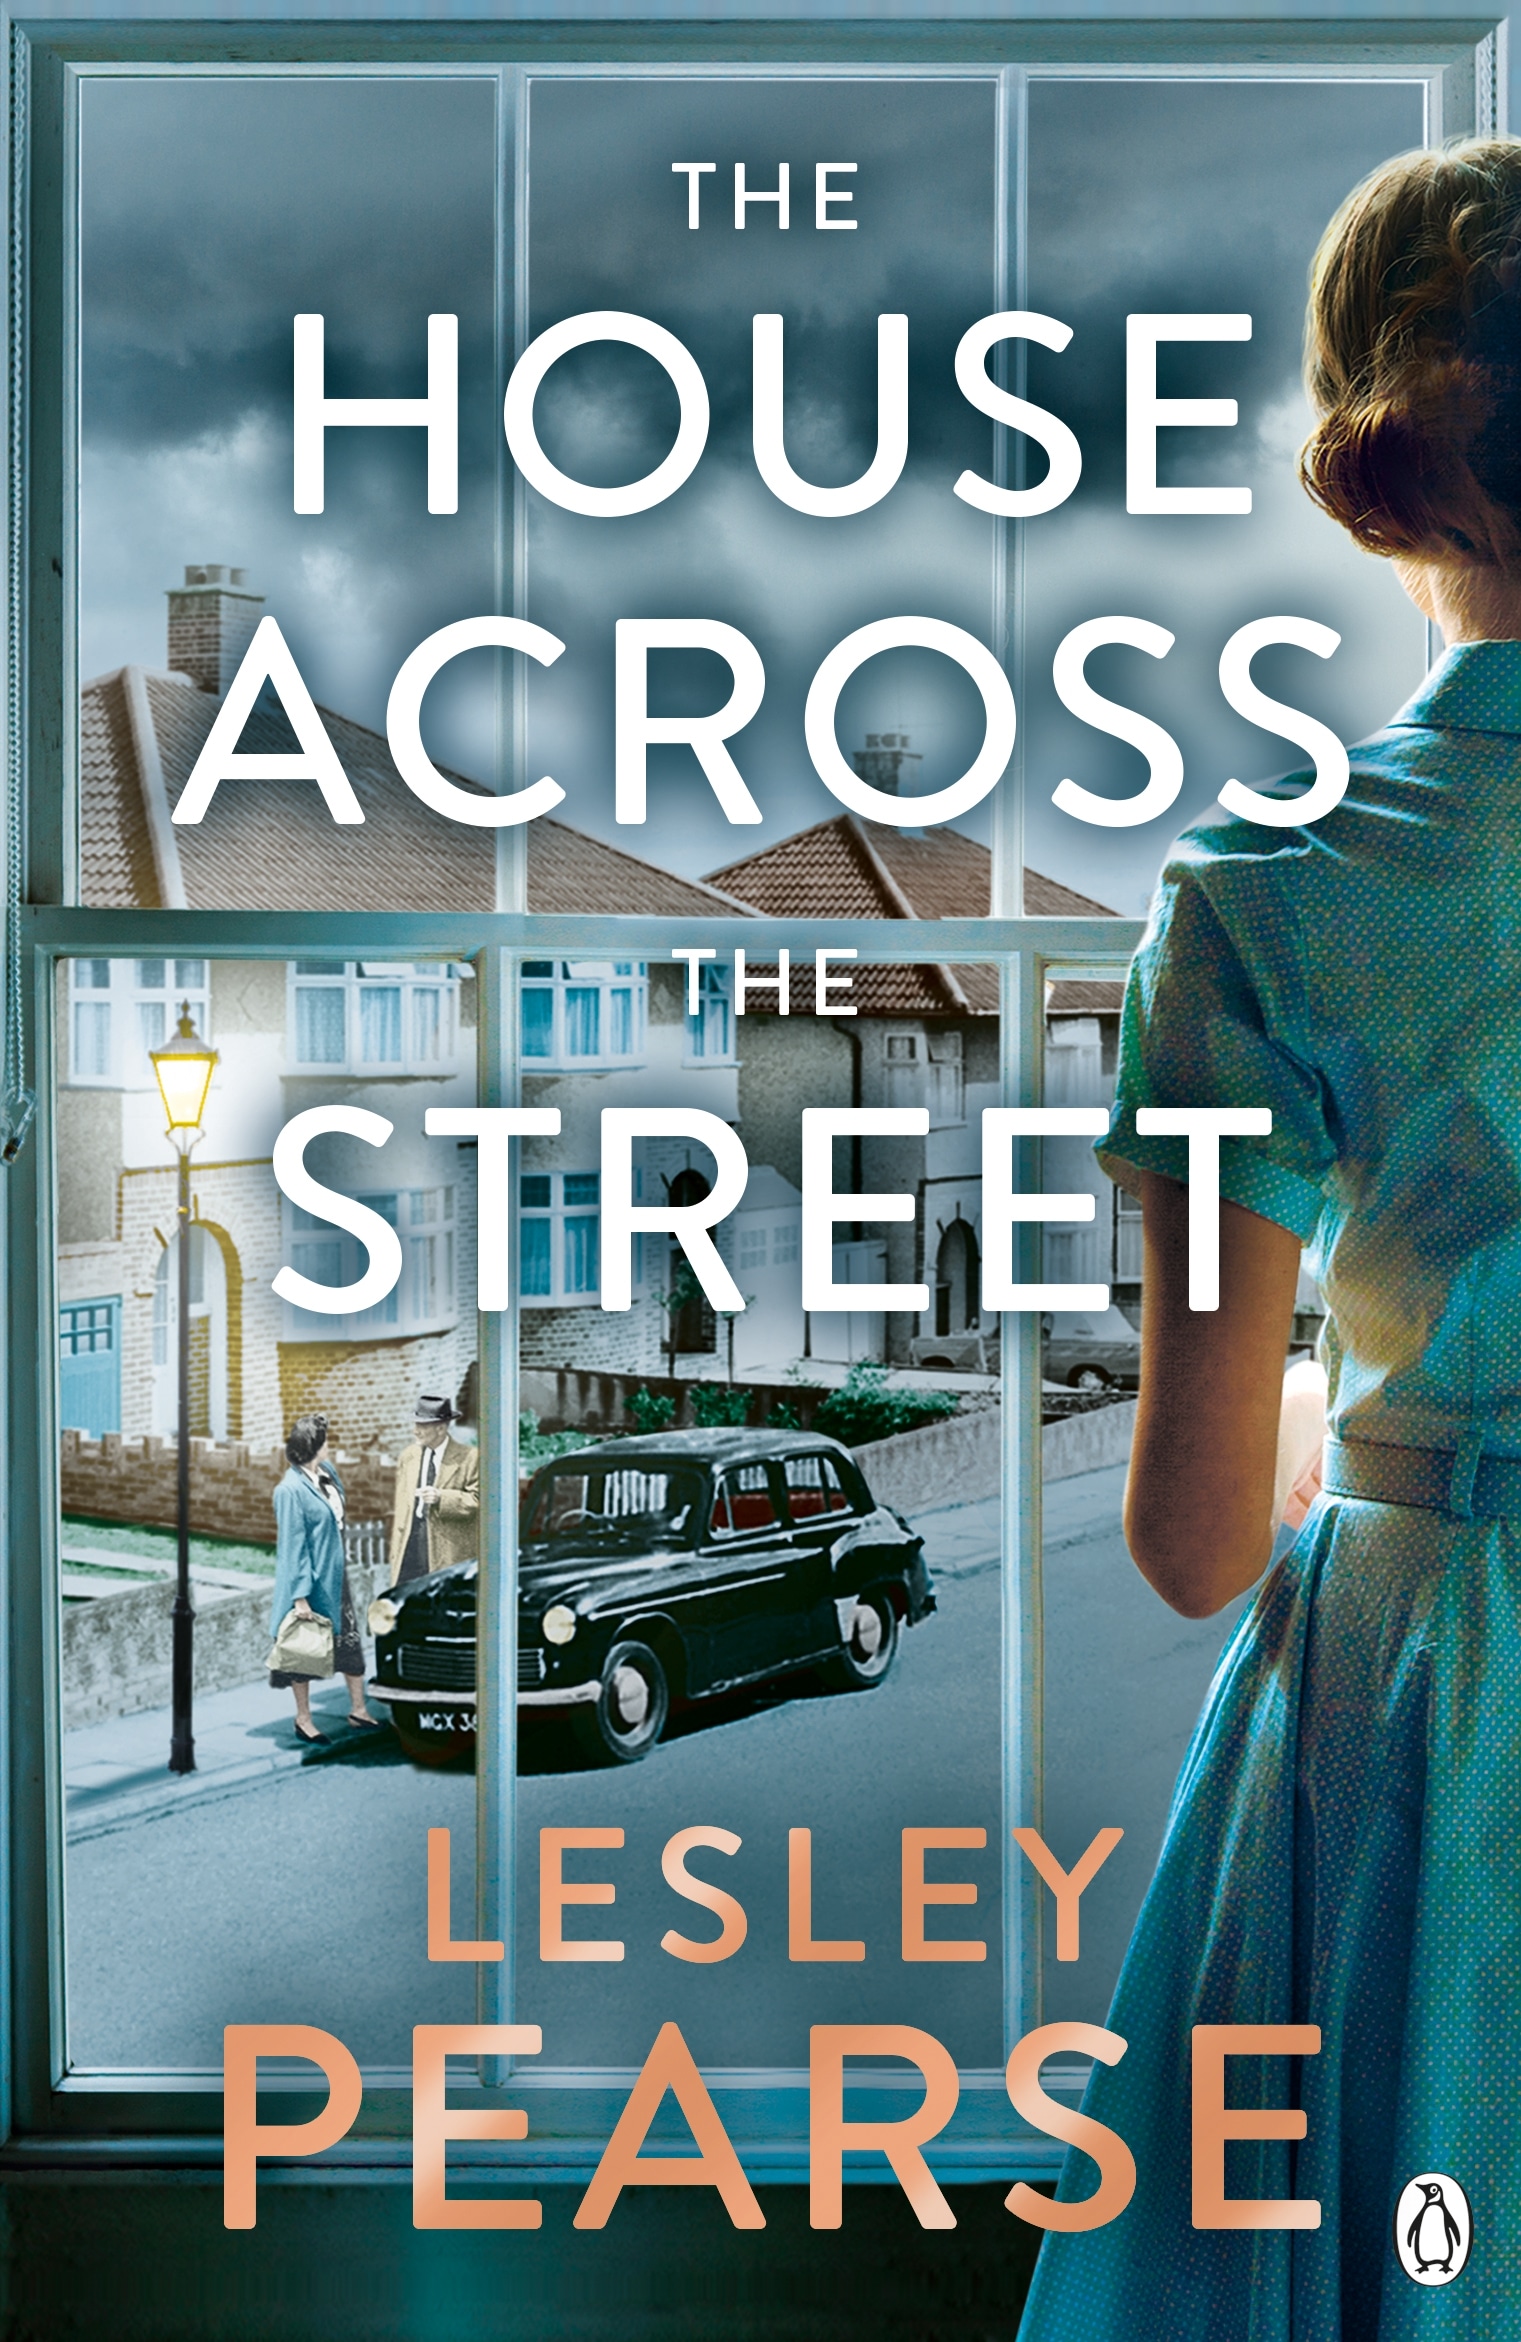 Book “The House Across the Street” by Lesley Pearse — May 2, 2019